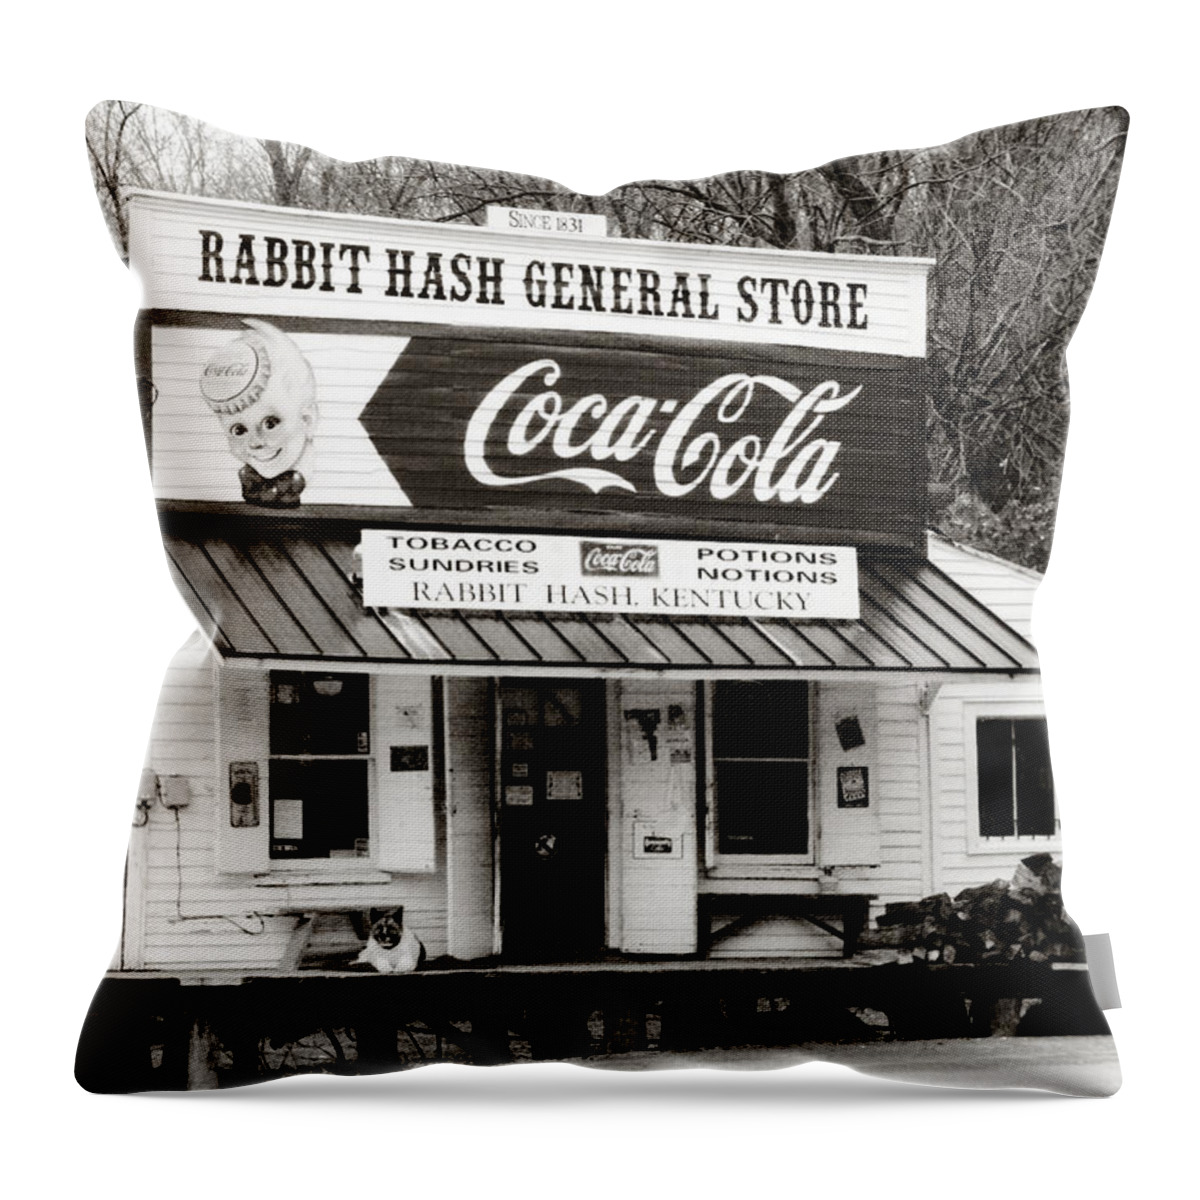 Rabbit Hash General Store Throw Pillow featuring the photograph Rabbit Hash General Store- Photogaphy by Linda Woods by Linda Woods